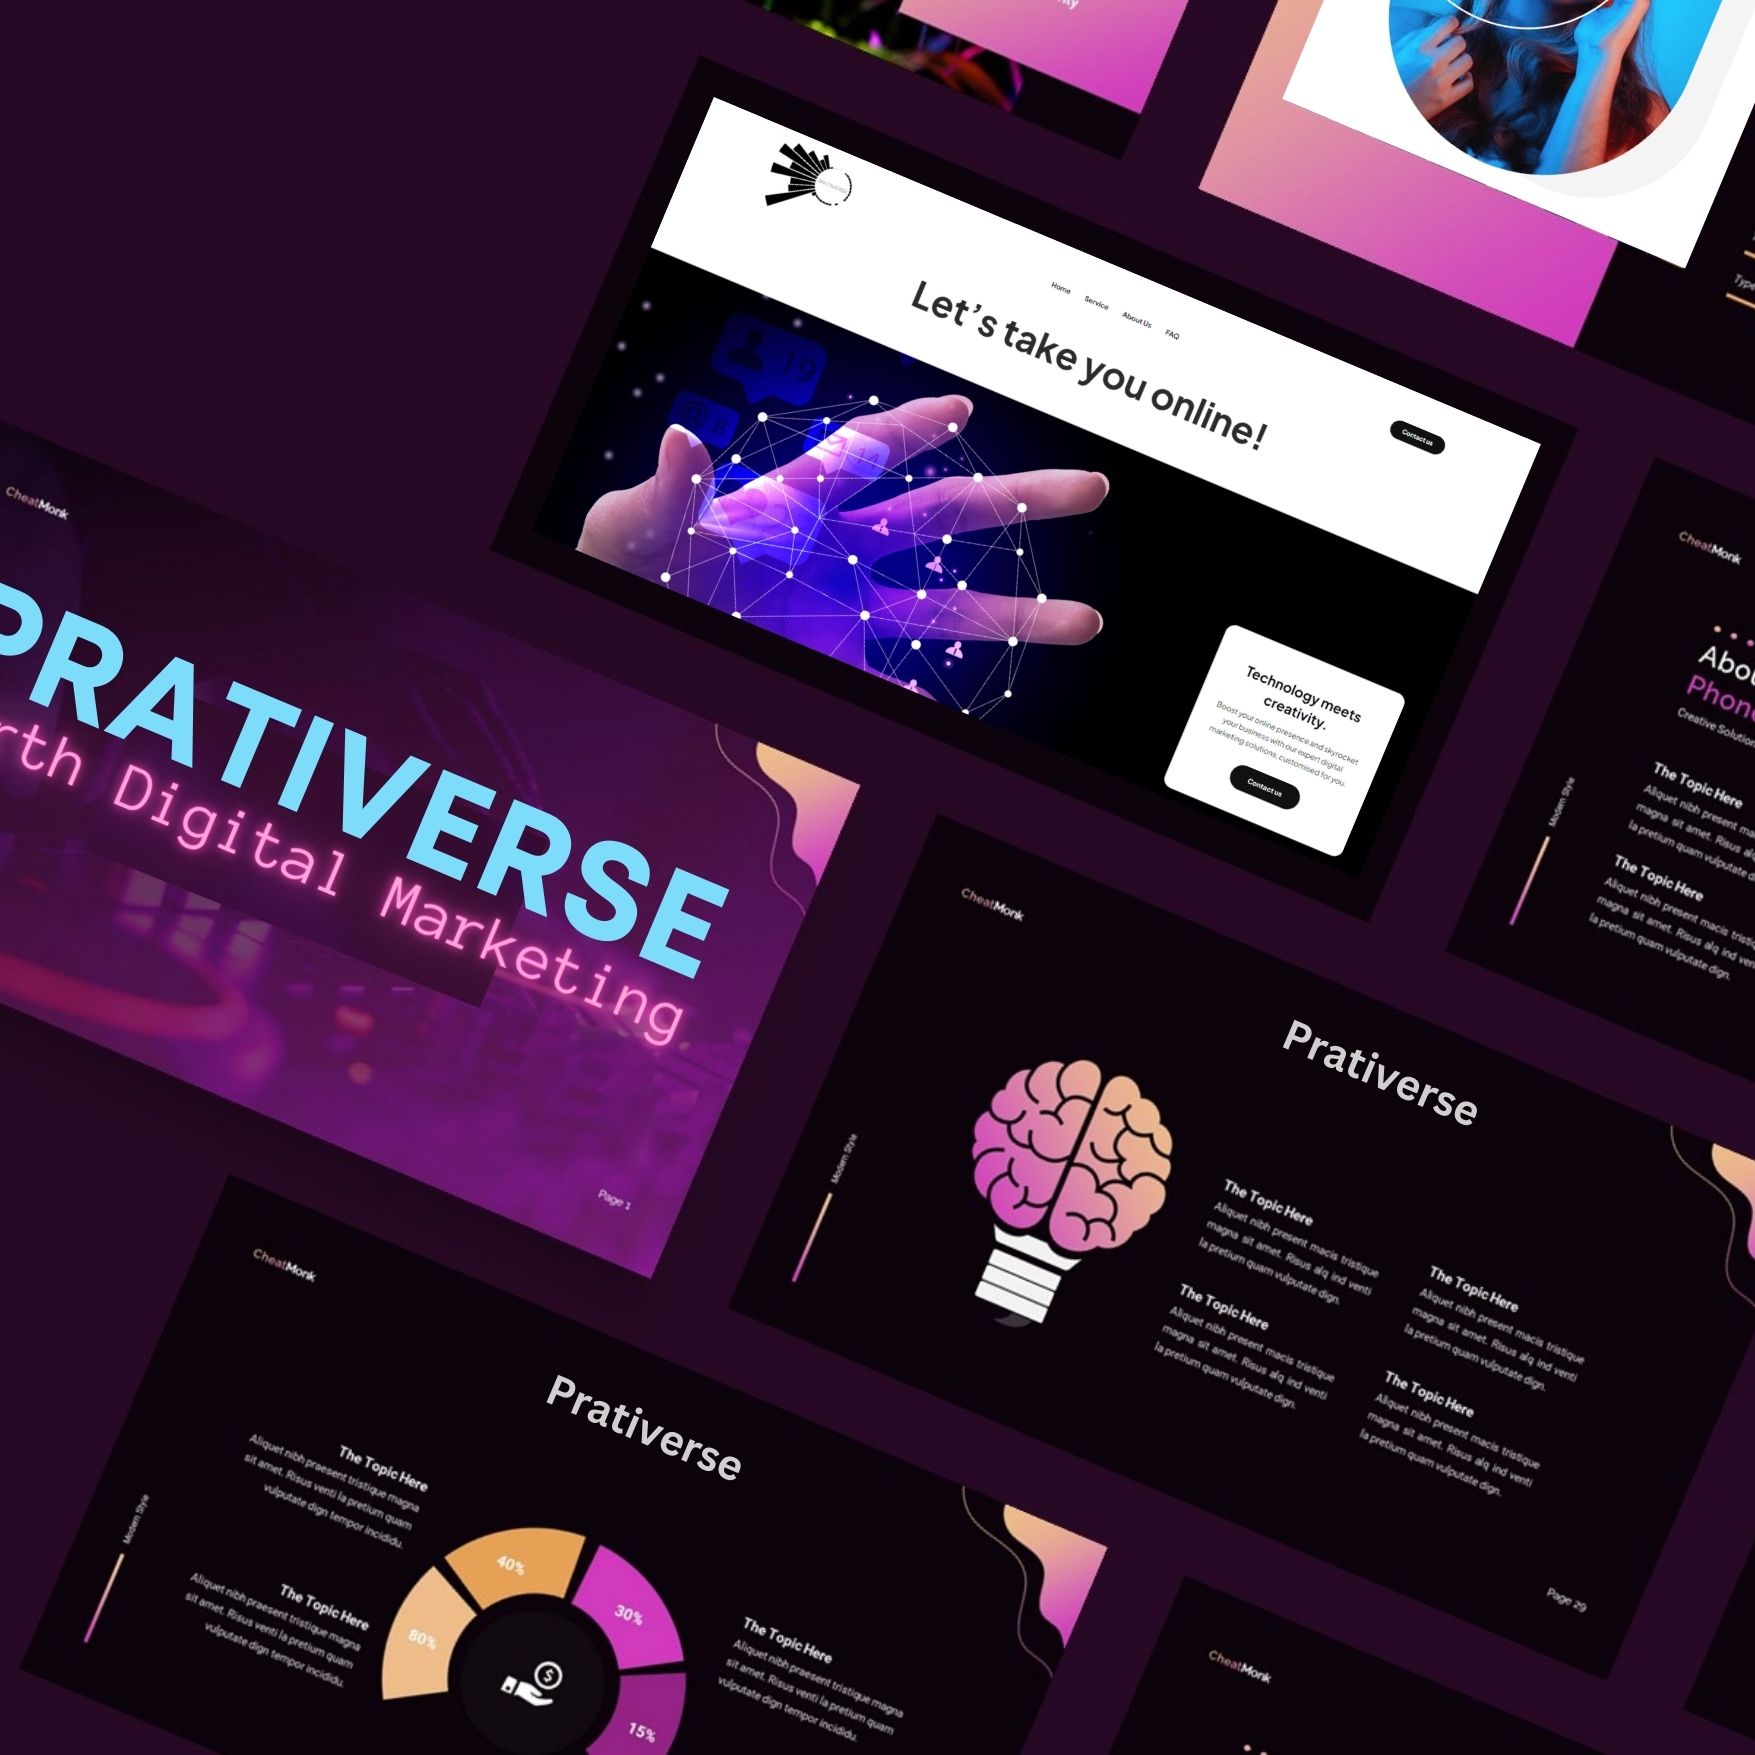 Prativerse is a digital marketing agency for web designing, social media marketing, copywriting, graphic designing and photography in Perth, Western Australia.